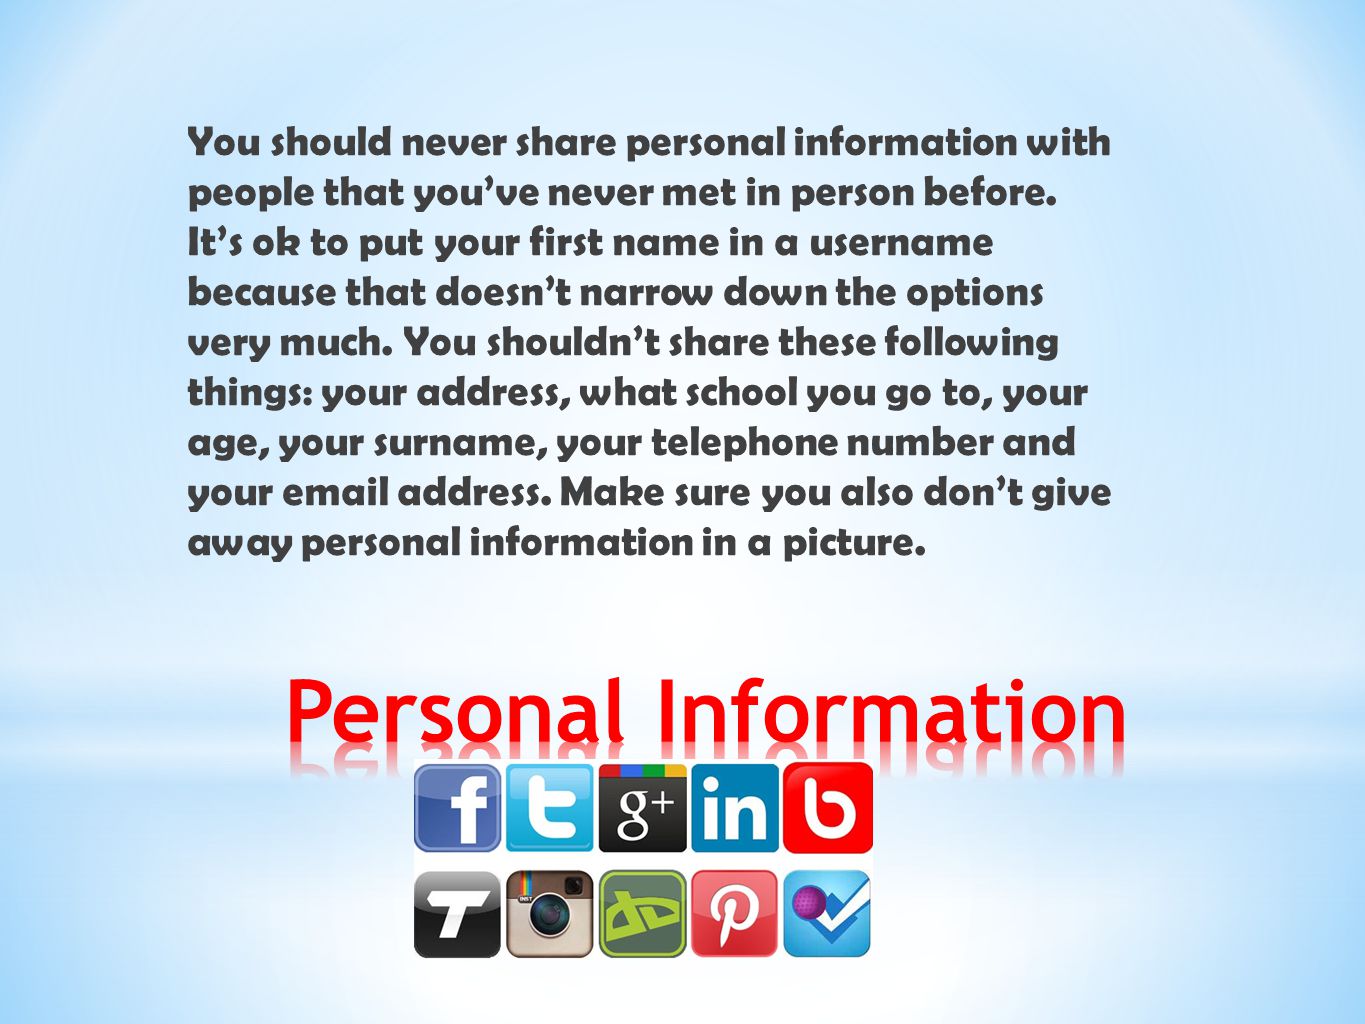 You should never share personal information with people that you’ve never met in person before. It’s ok to put your first name in a username because that doesn’t narrow down the options very much. You shouldn’t share these following things: your address, what school you go to, your age, your surname, your telephone number and your  address. Make sure you also don’t give away personal information in a picture.